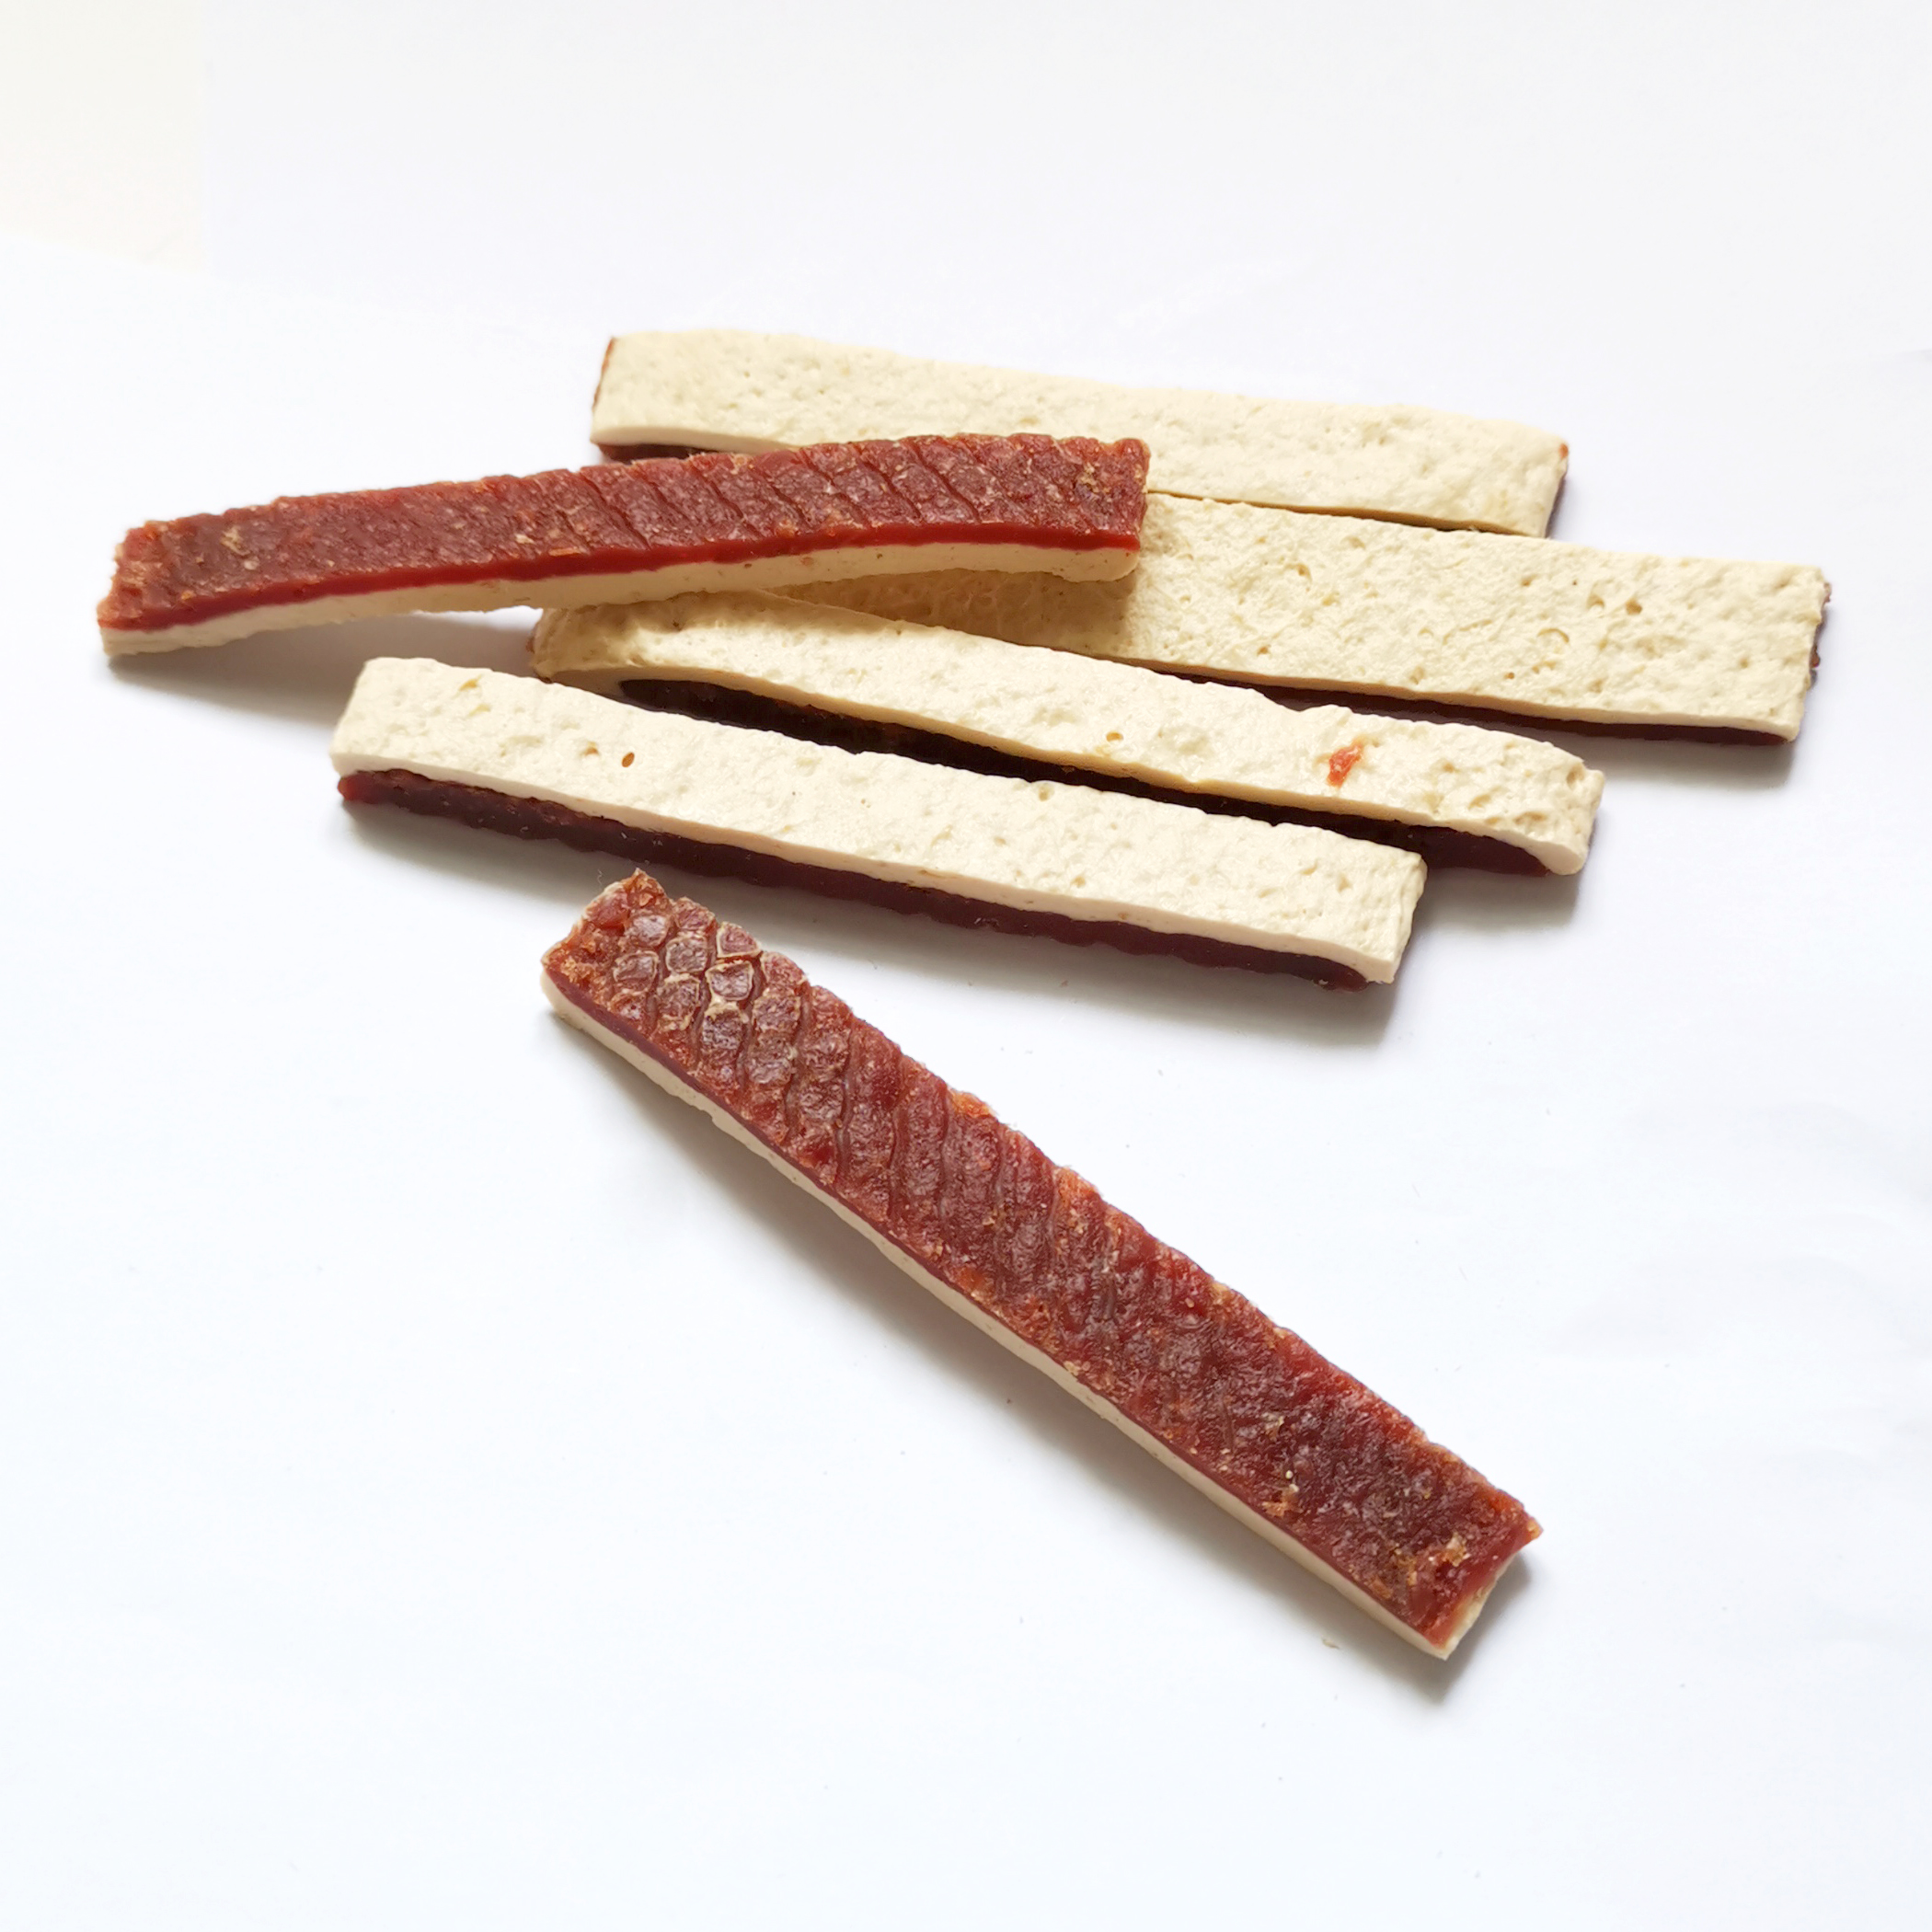 Beef and fish strips